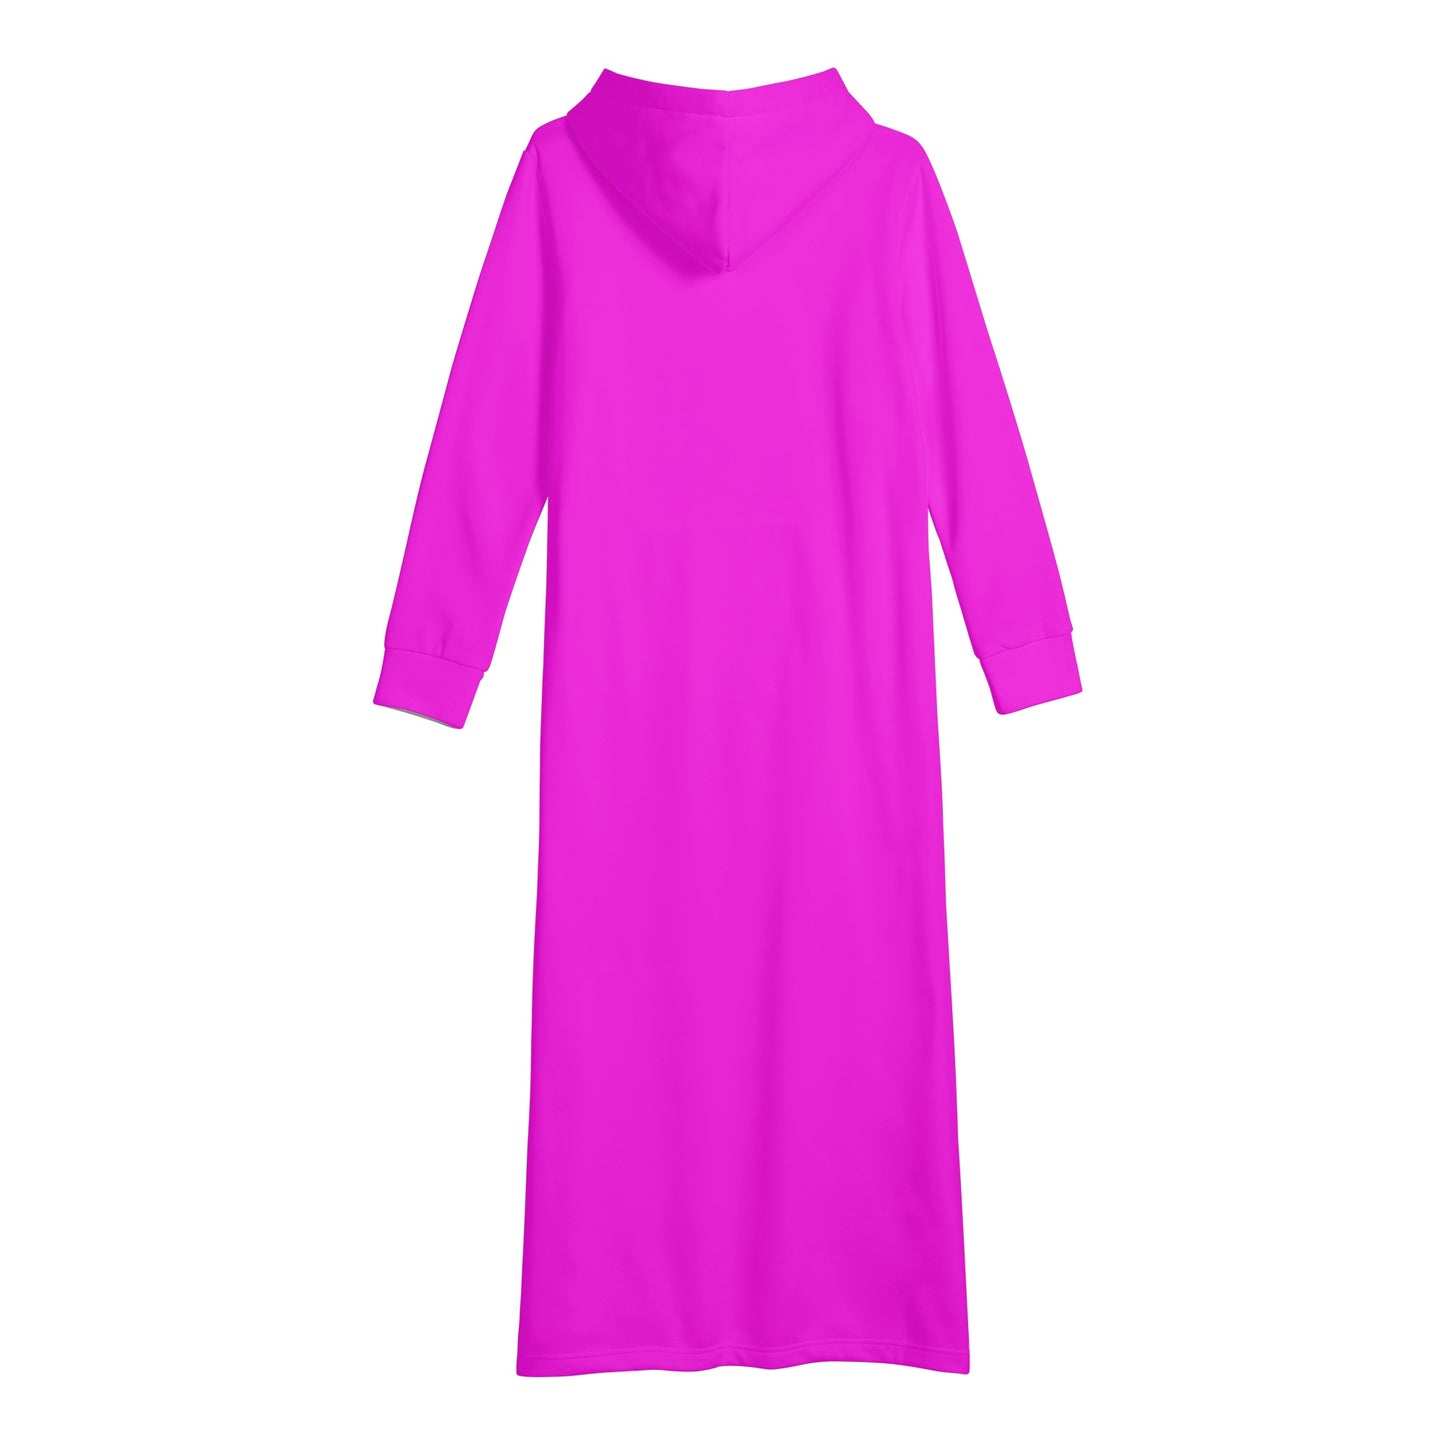 T4x Faith with Blessing Pink Womens Long Hoodie Dress